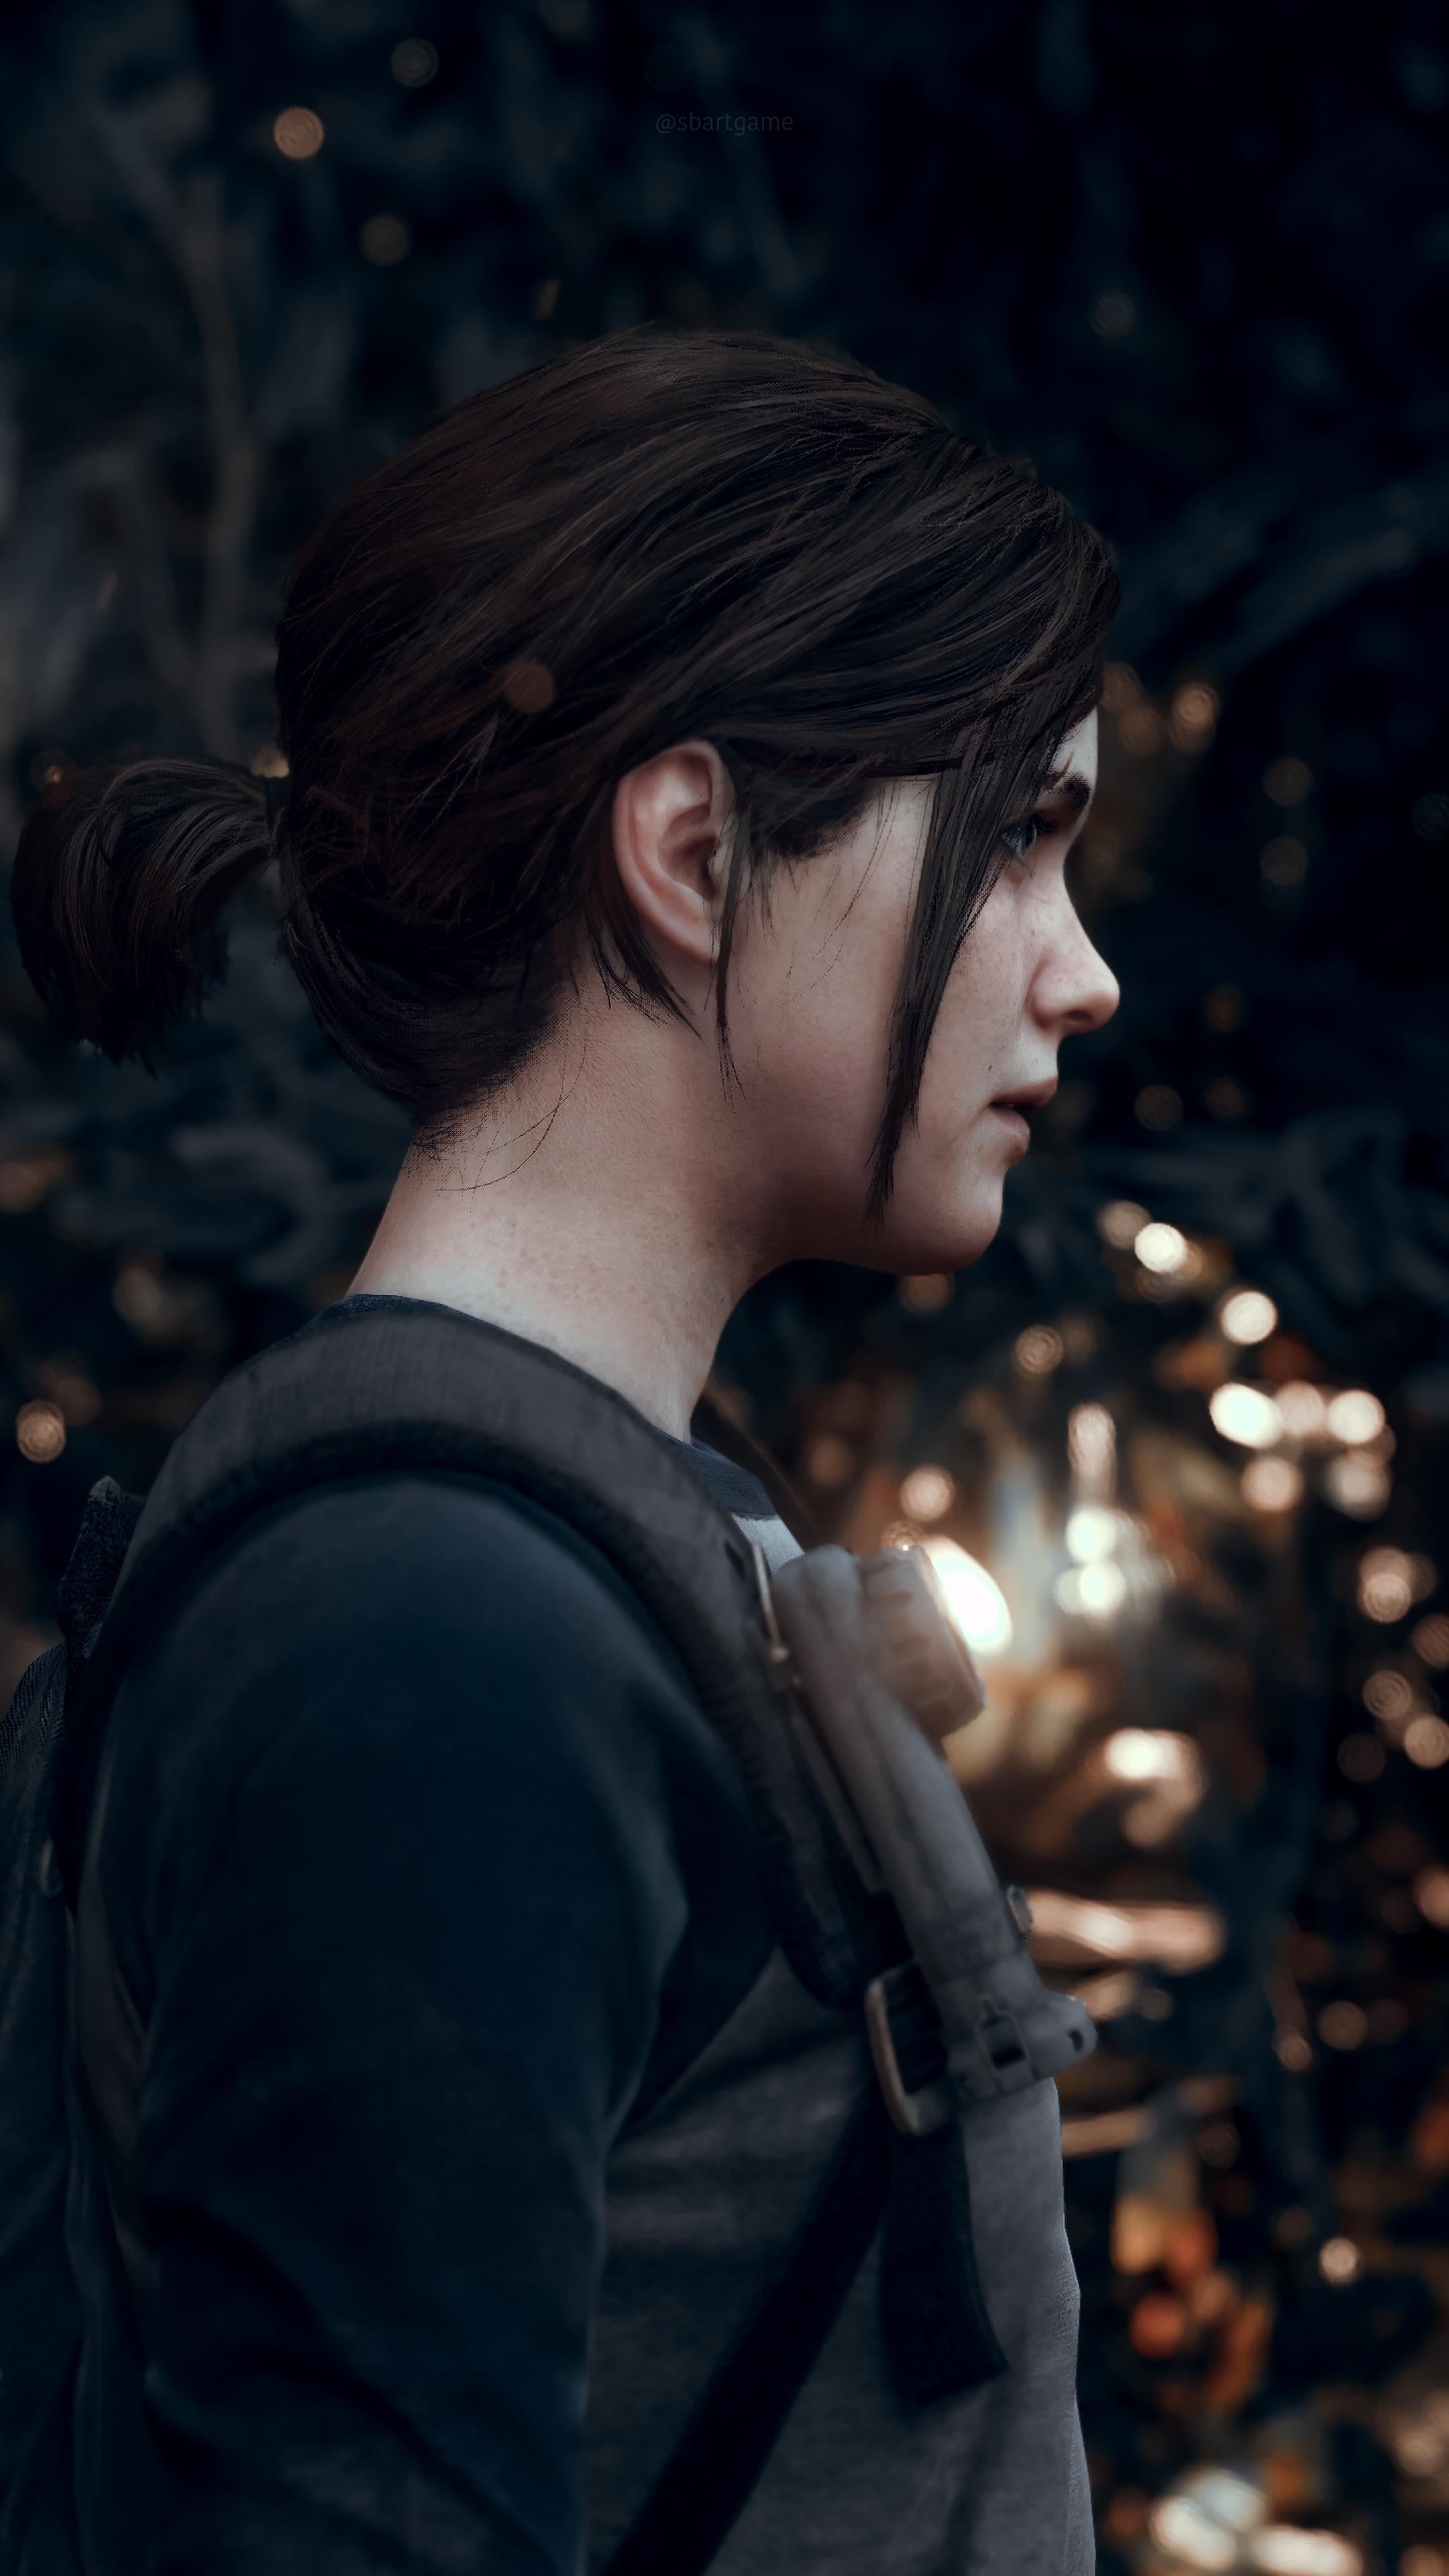 The Last of Us 2 Ellie Rain Live Wallpaper, Made a new Last of Us 2  wallpaper.. loving it!, By ReFuschian Gaming